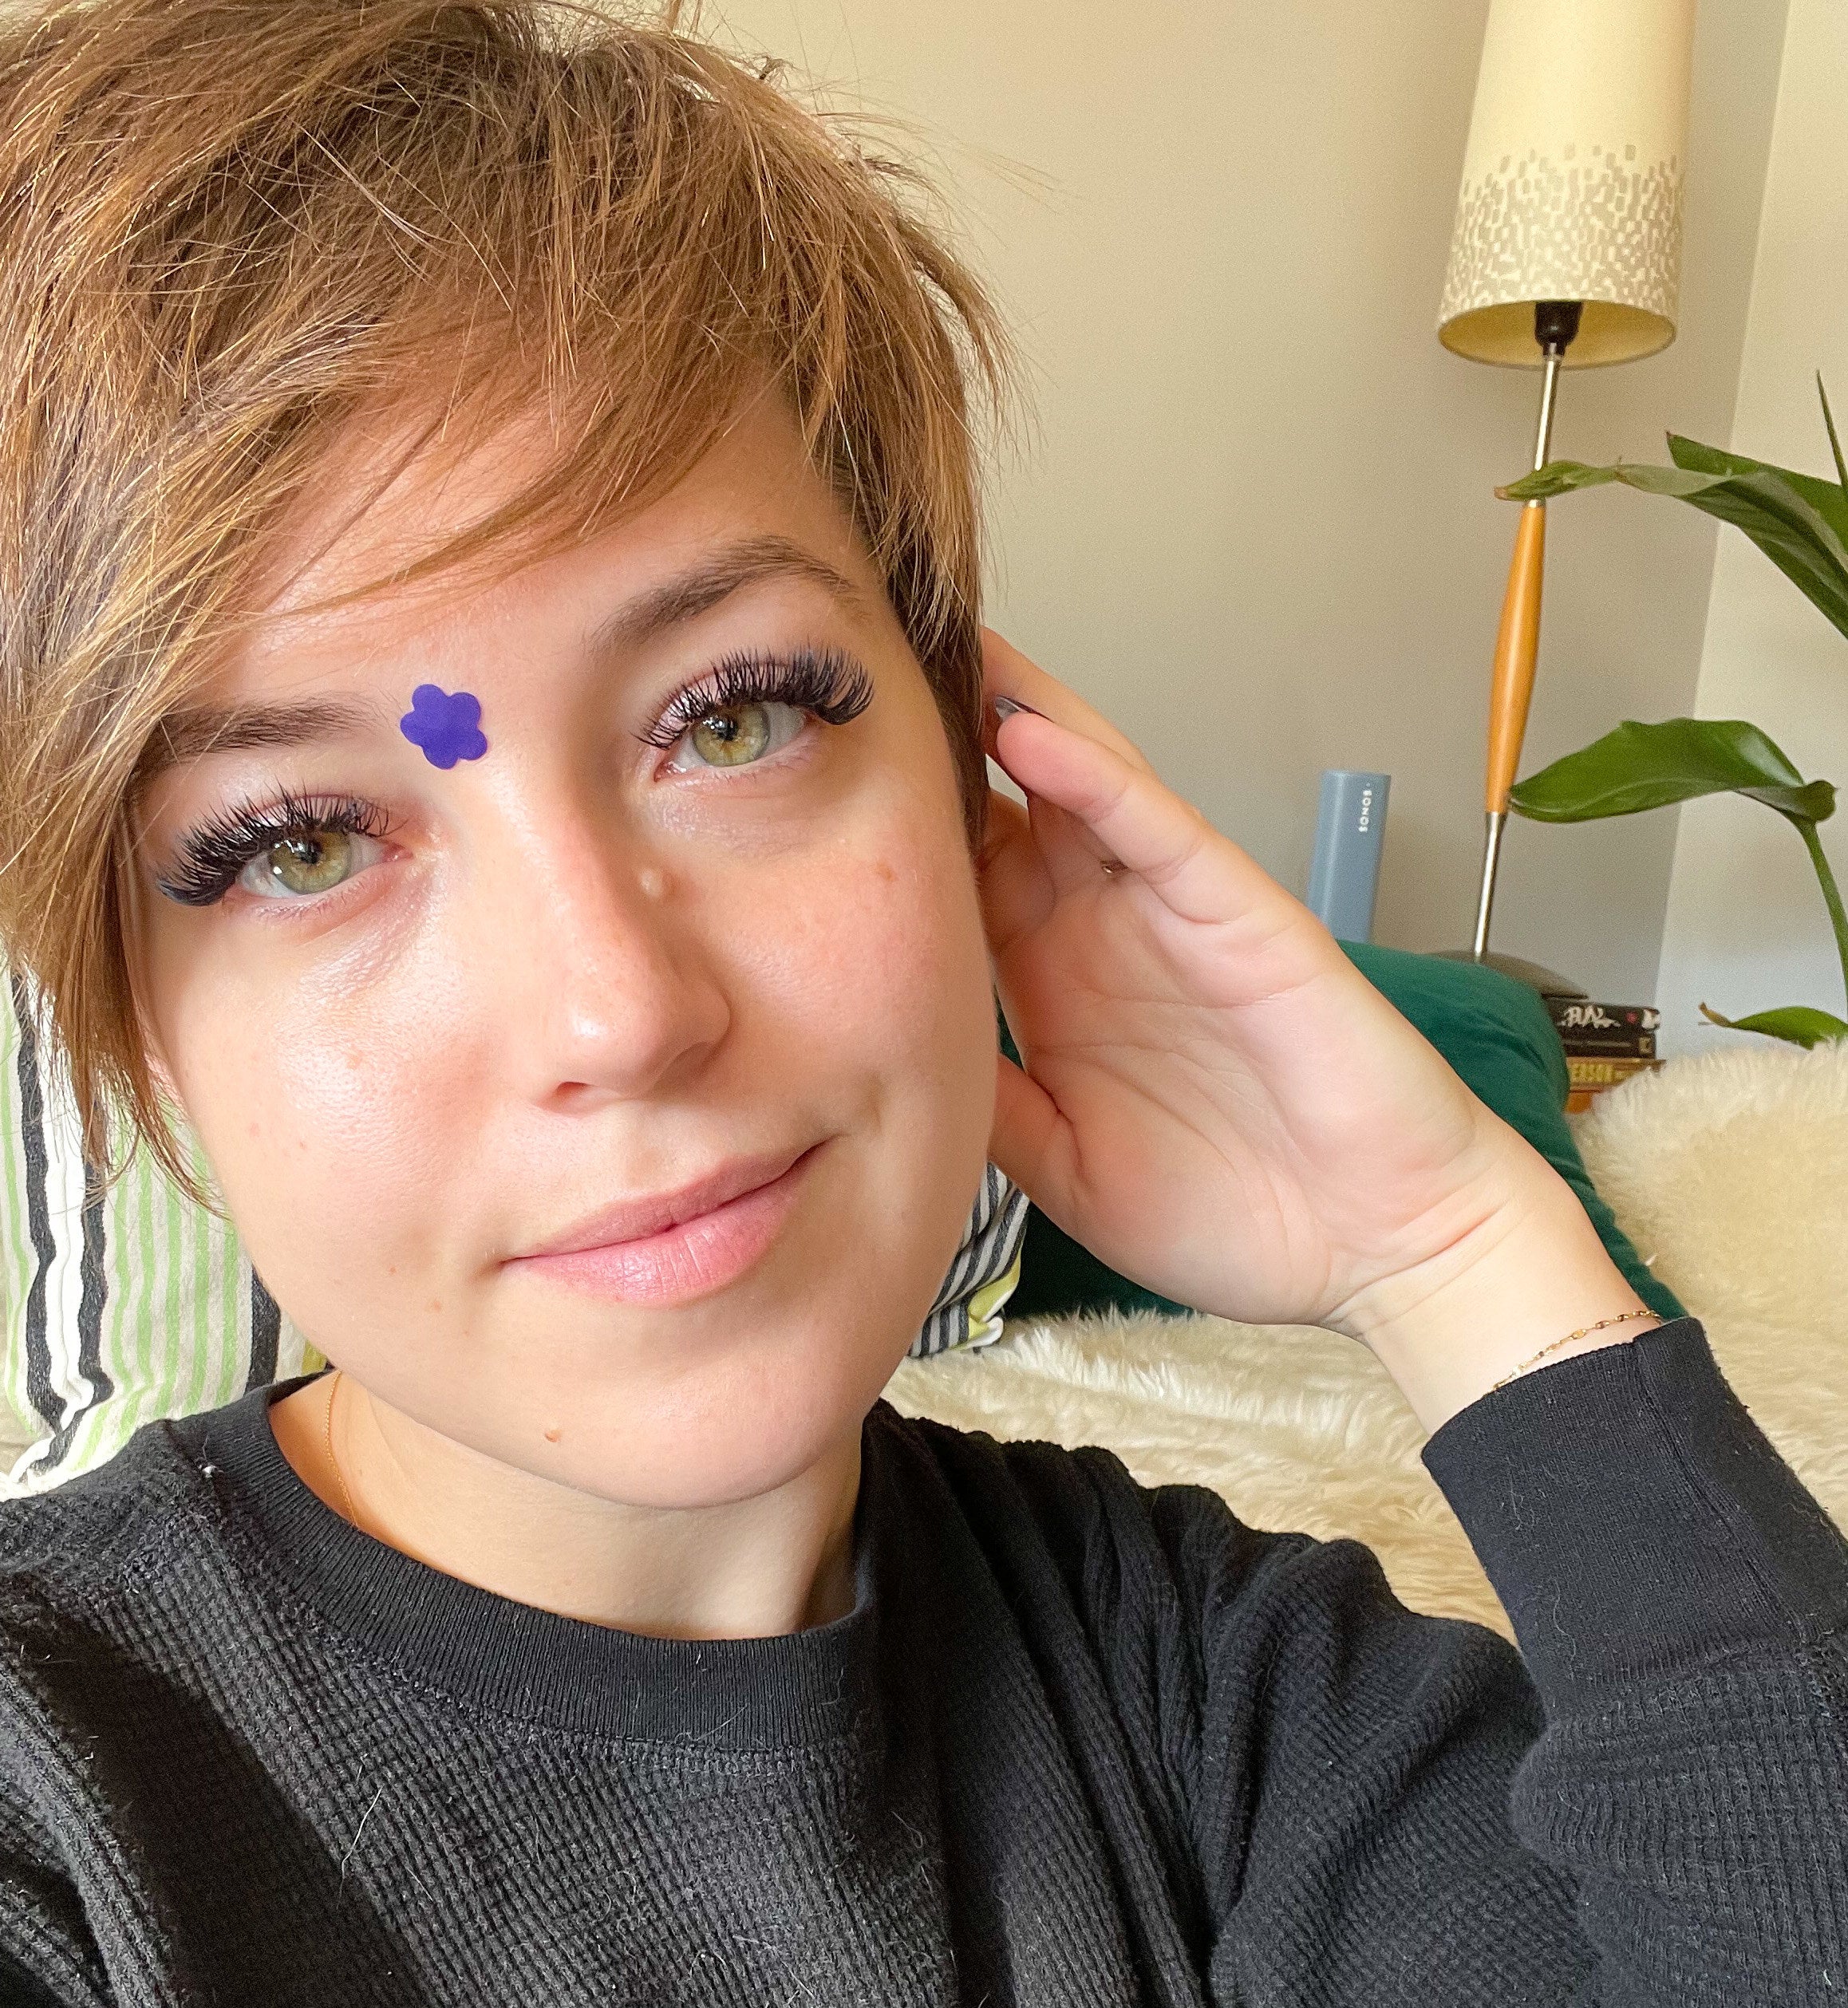 buzzfeed writer wearing one of the flower shaped patches on her forehead